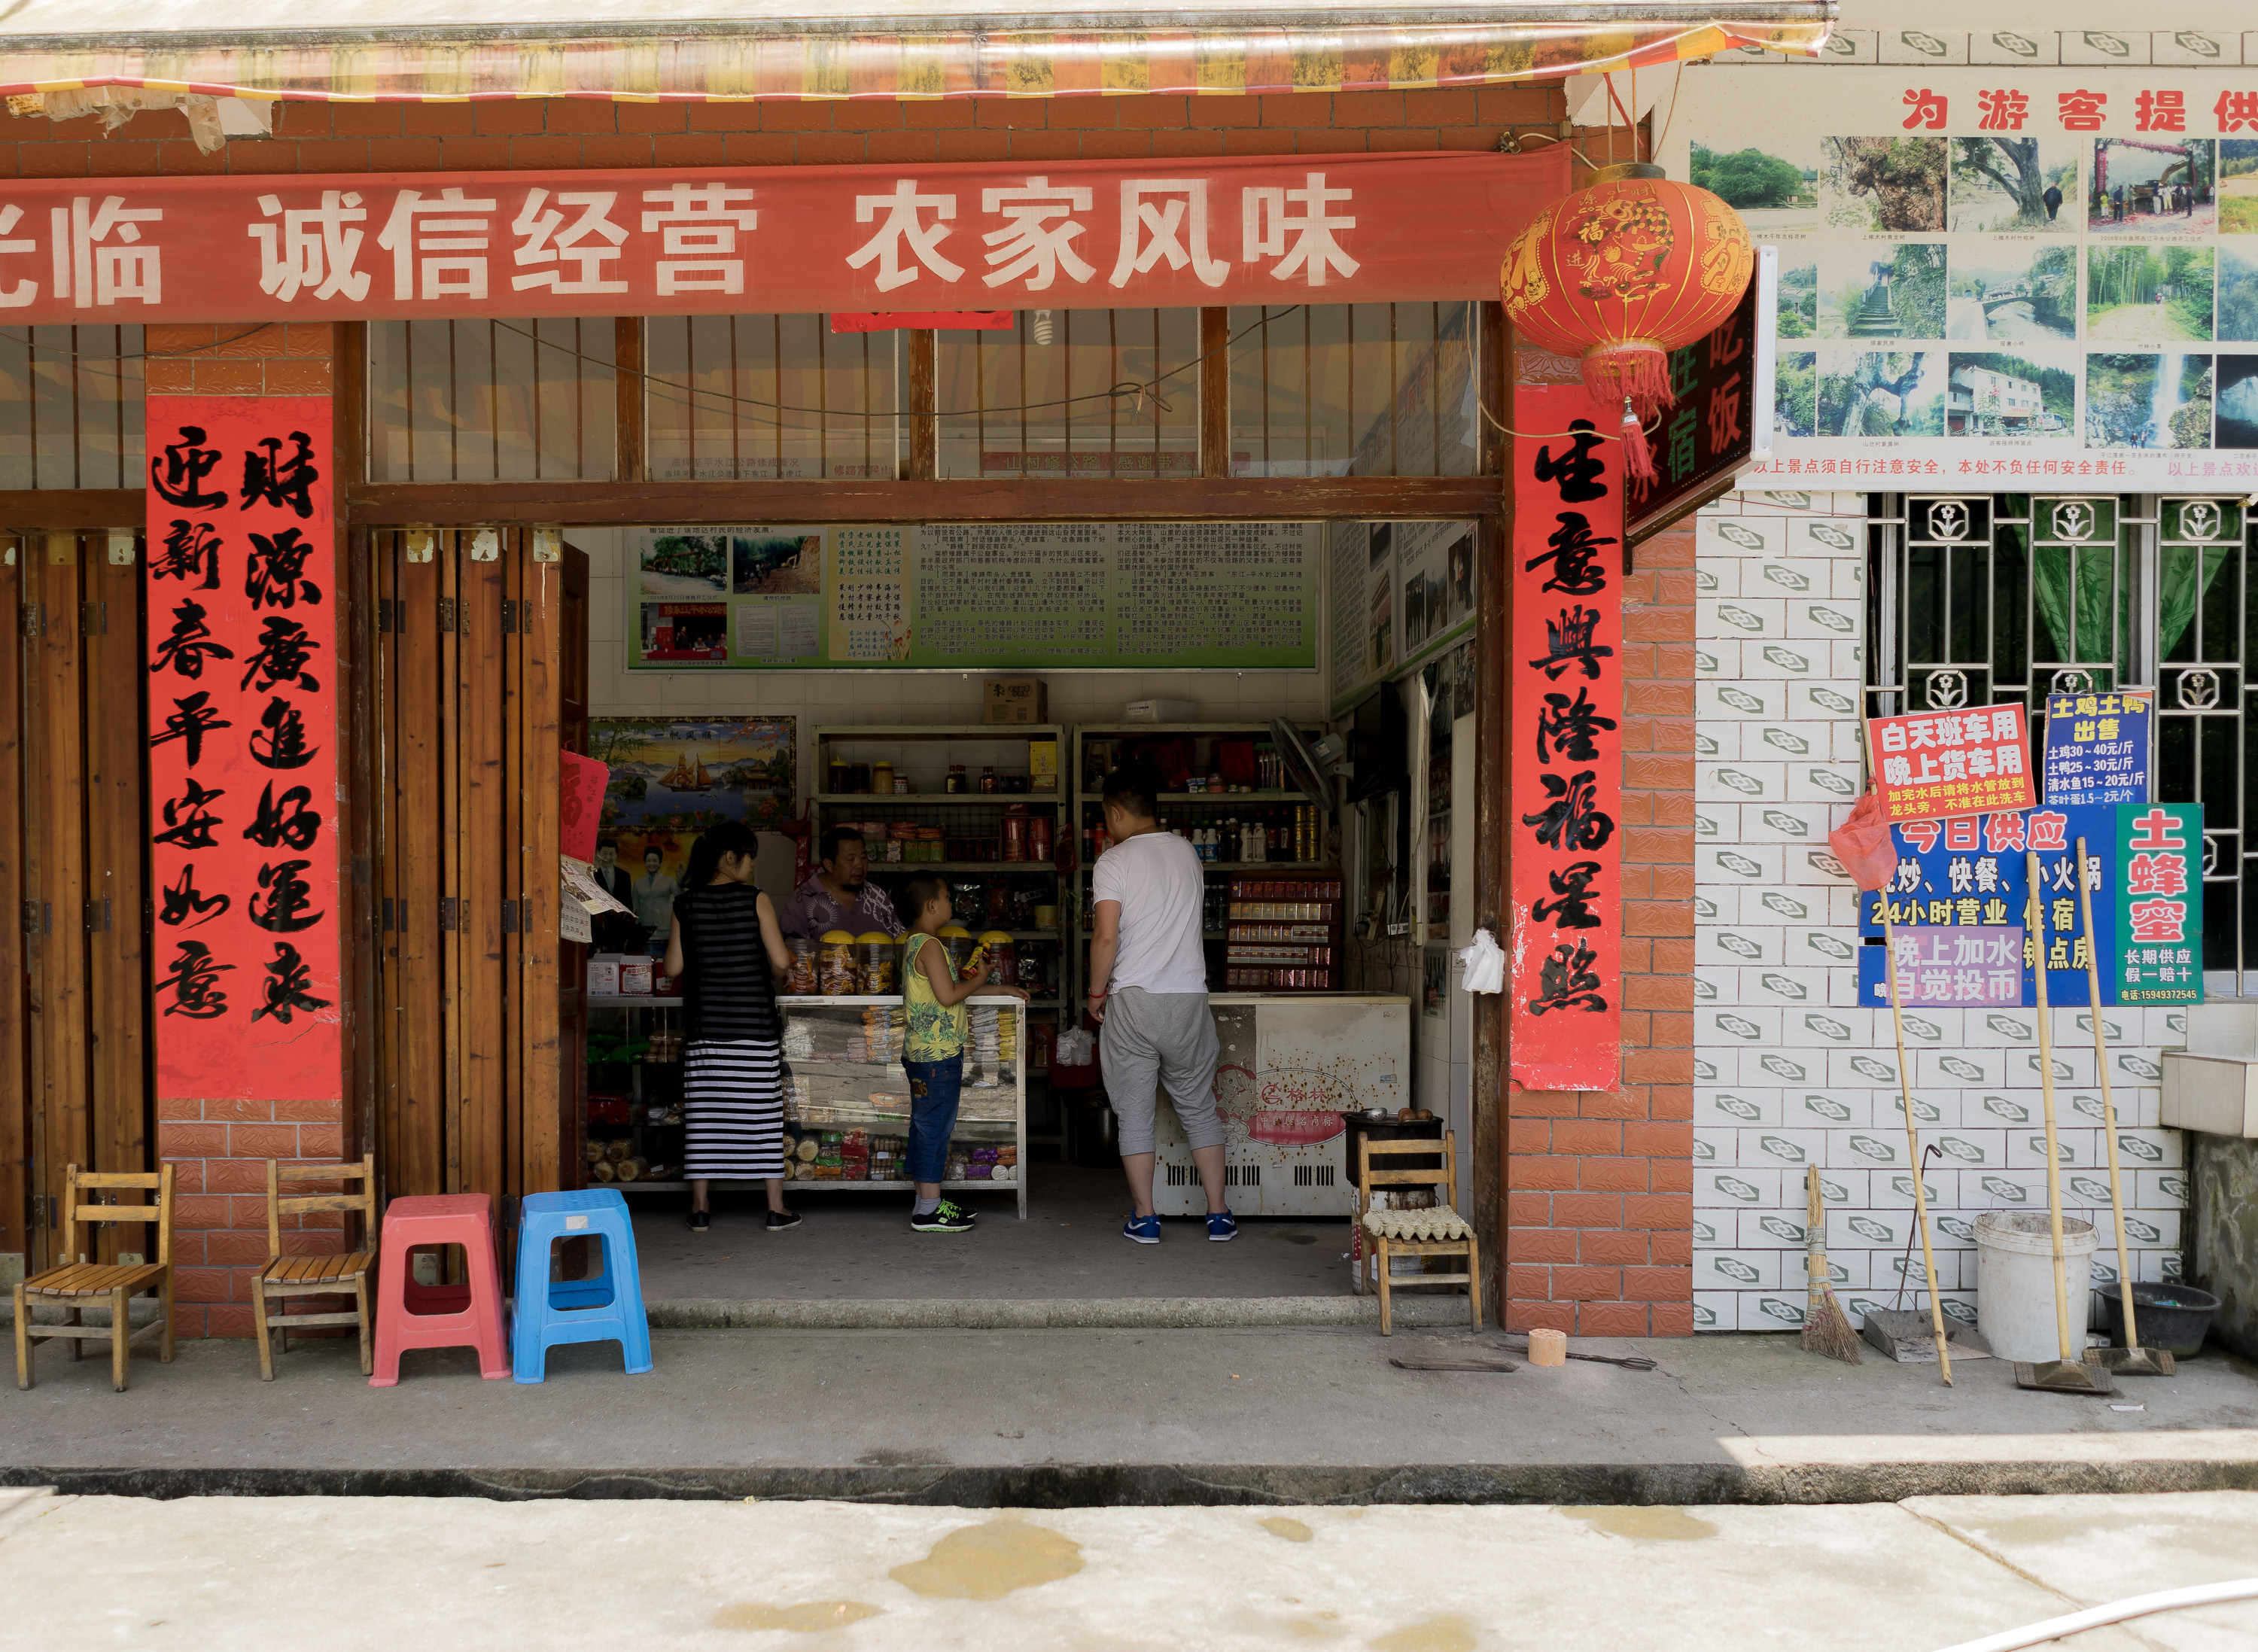 Chinese shop from China